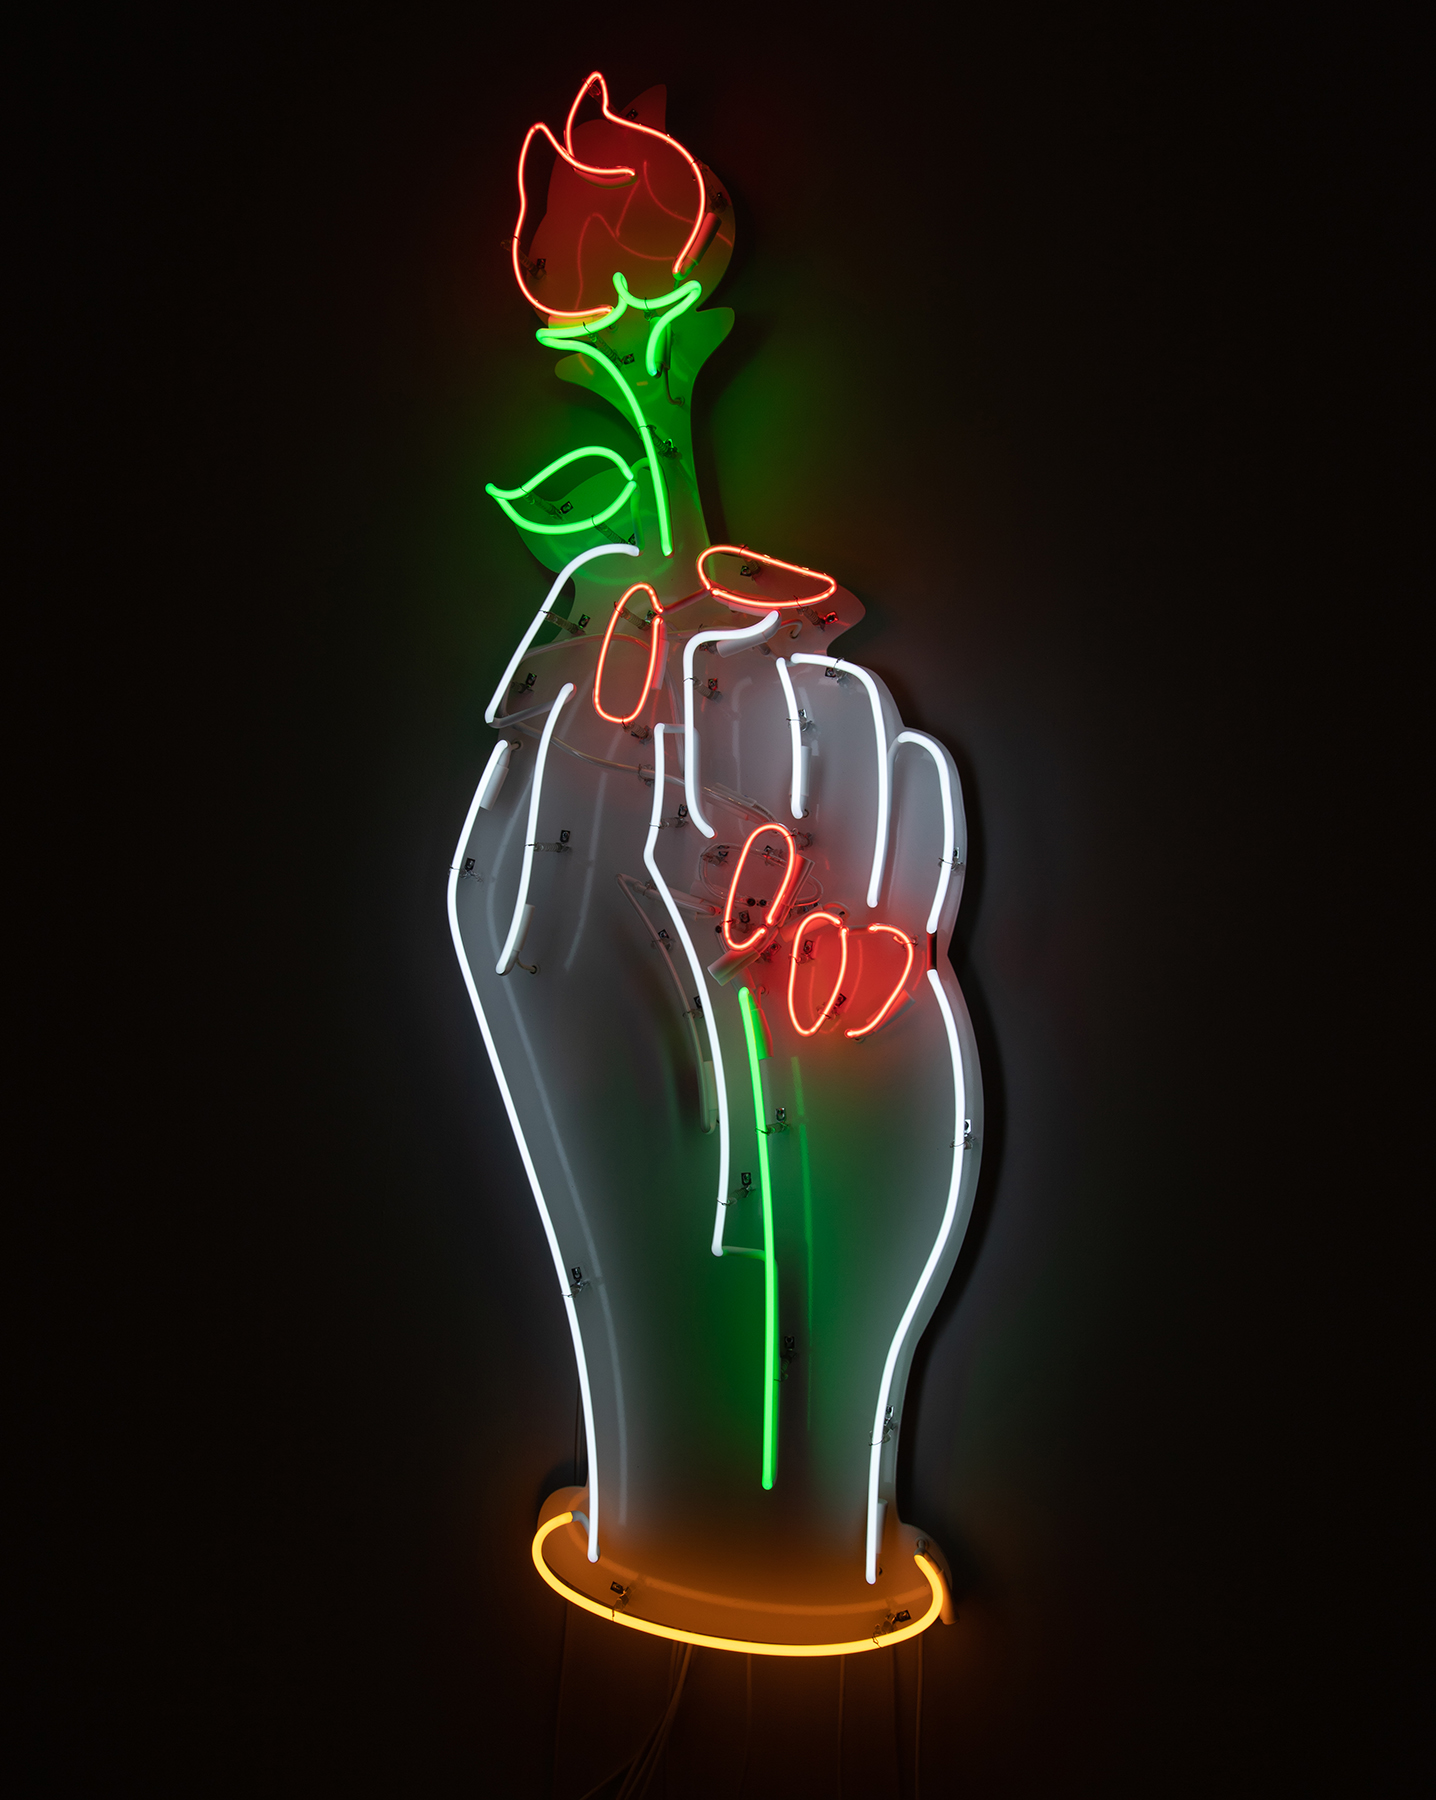 Neon sign of a hand with painted nails holding a red rose